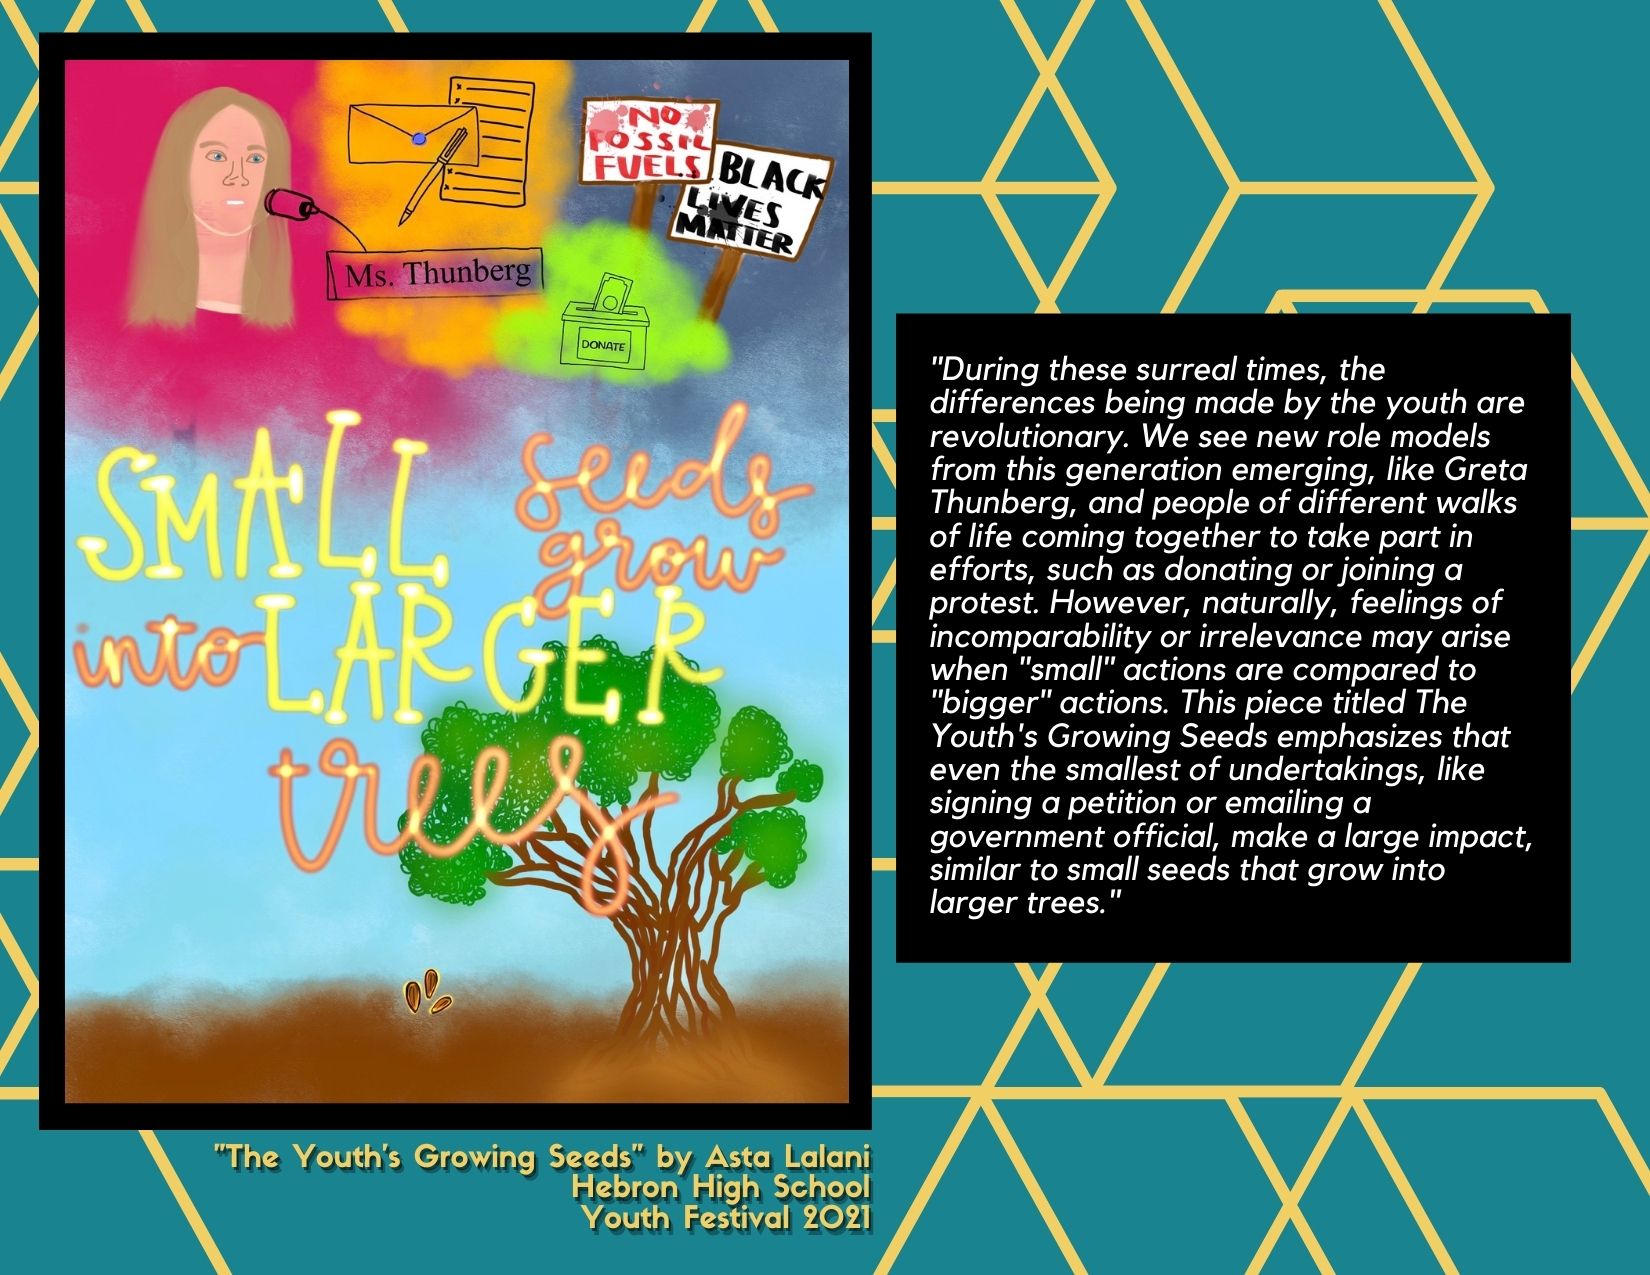 Artwork showing drawings of a tree, Greta Thunberg, and protest signs with the text "Small seeds grow into larger trees"